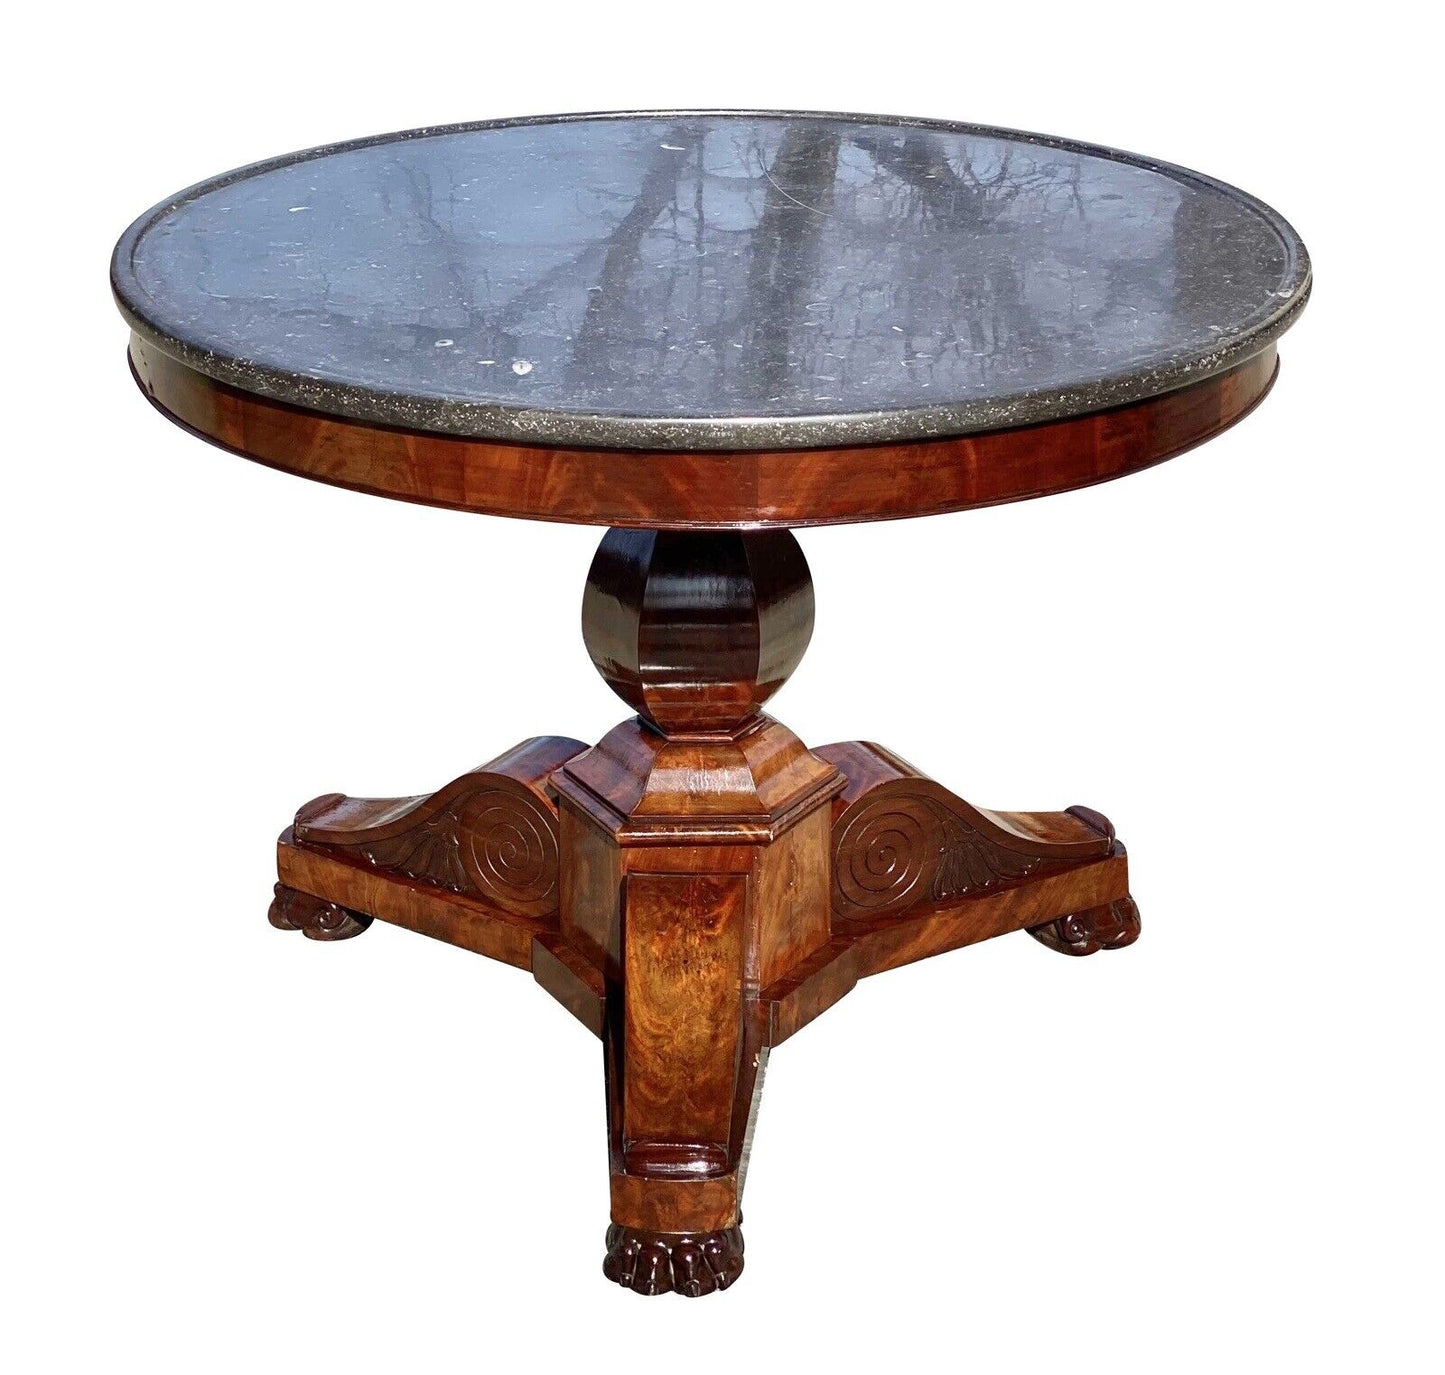 19th C Antique Mahogany Round Empire Parlor Table With Onyx Dish Top